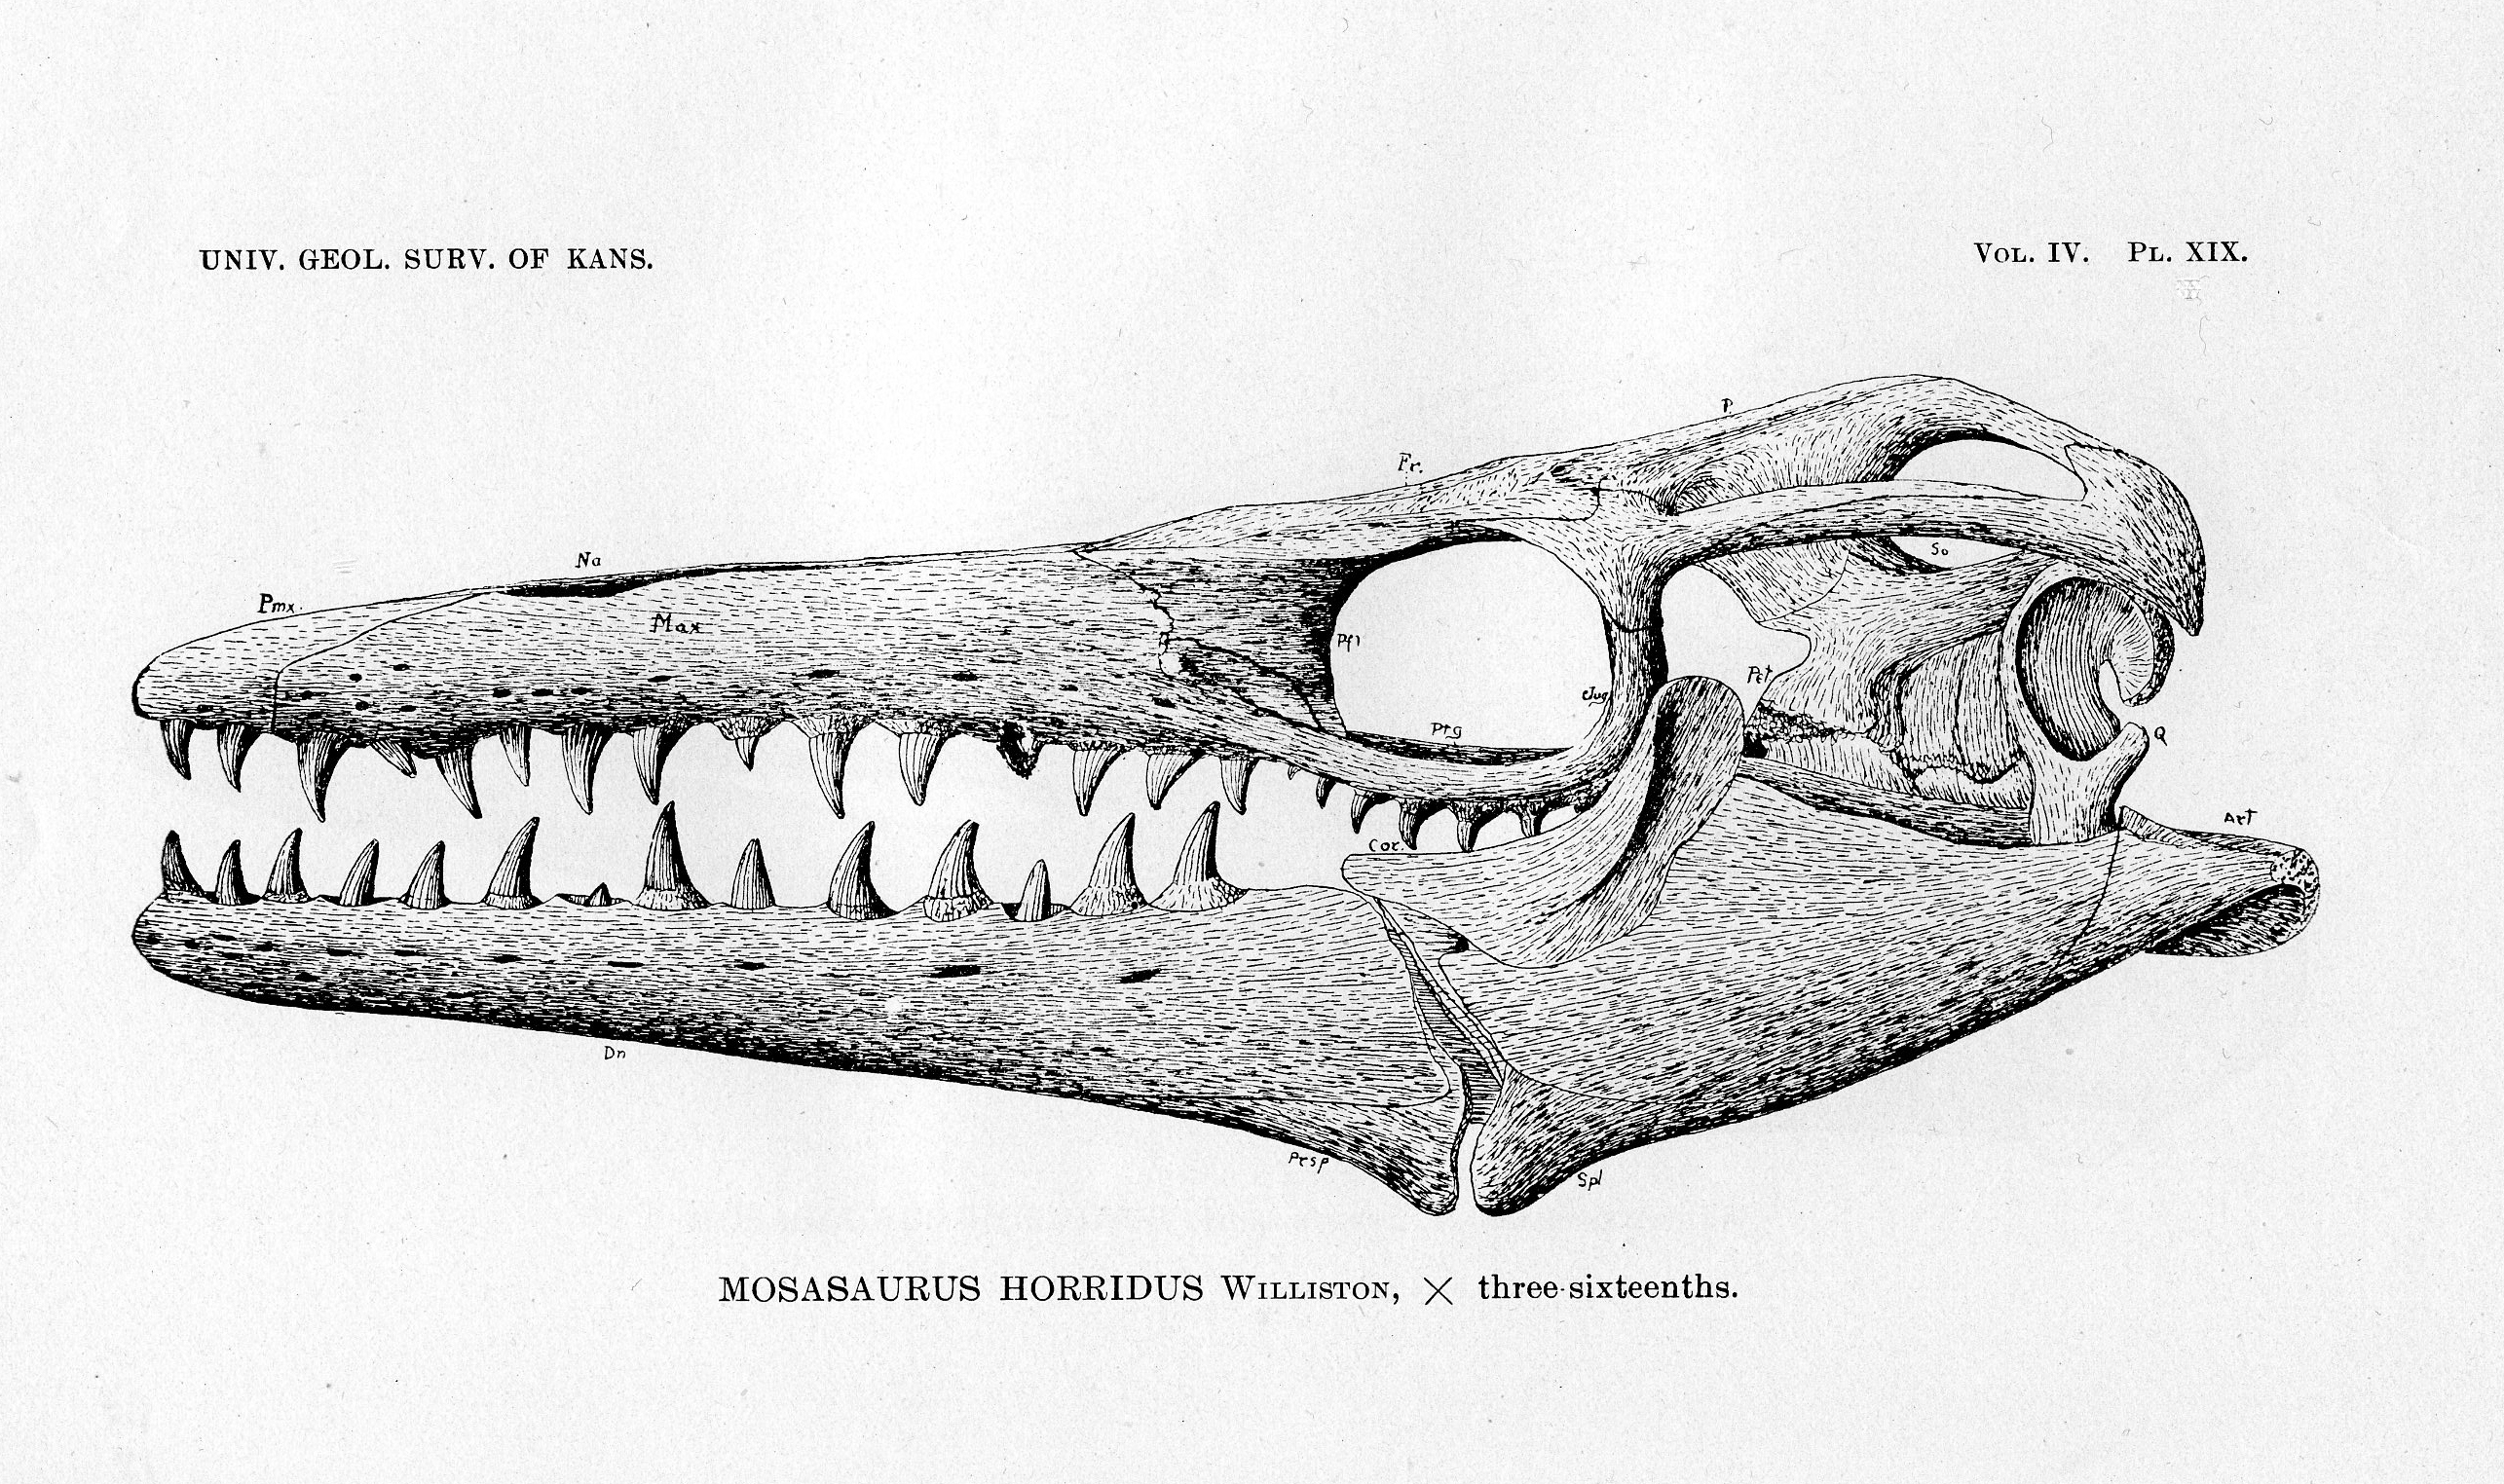 1898 drawing of the skull of a mosasaur species found in Kansas chalk beds.